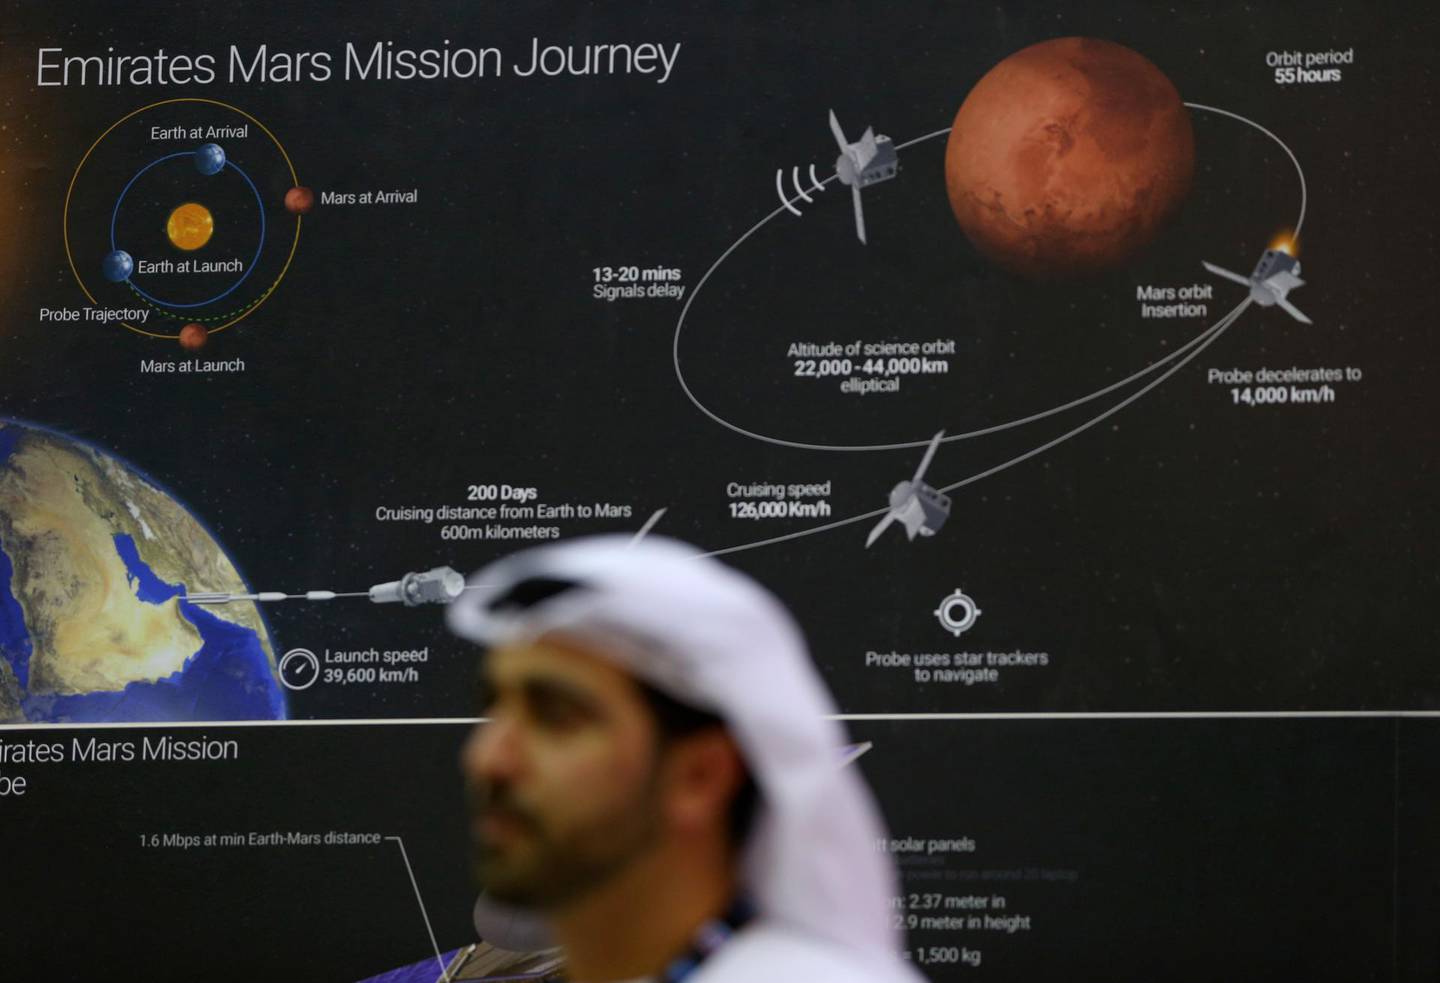 A space mission to Mars map sits on the wall of the UAE Space Agency exhibition stand on the second day of the 14th Dubai Air Show at Dubai World Central (DWC) in Dubai, United Arab Emirates, on Monday, Nov. 9, 2015. The Dubai Air Show is the biggest aerospace event in the Middle East, Asia and Africa and runs Nov. 8 - 12. Photographer: Jasper Juinen/Bloomberg